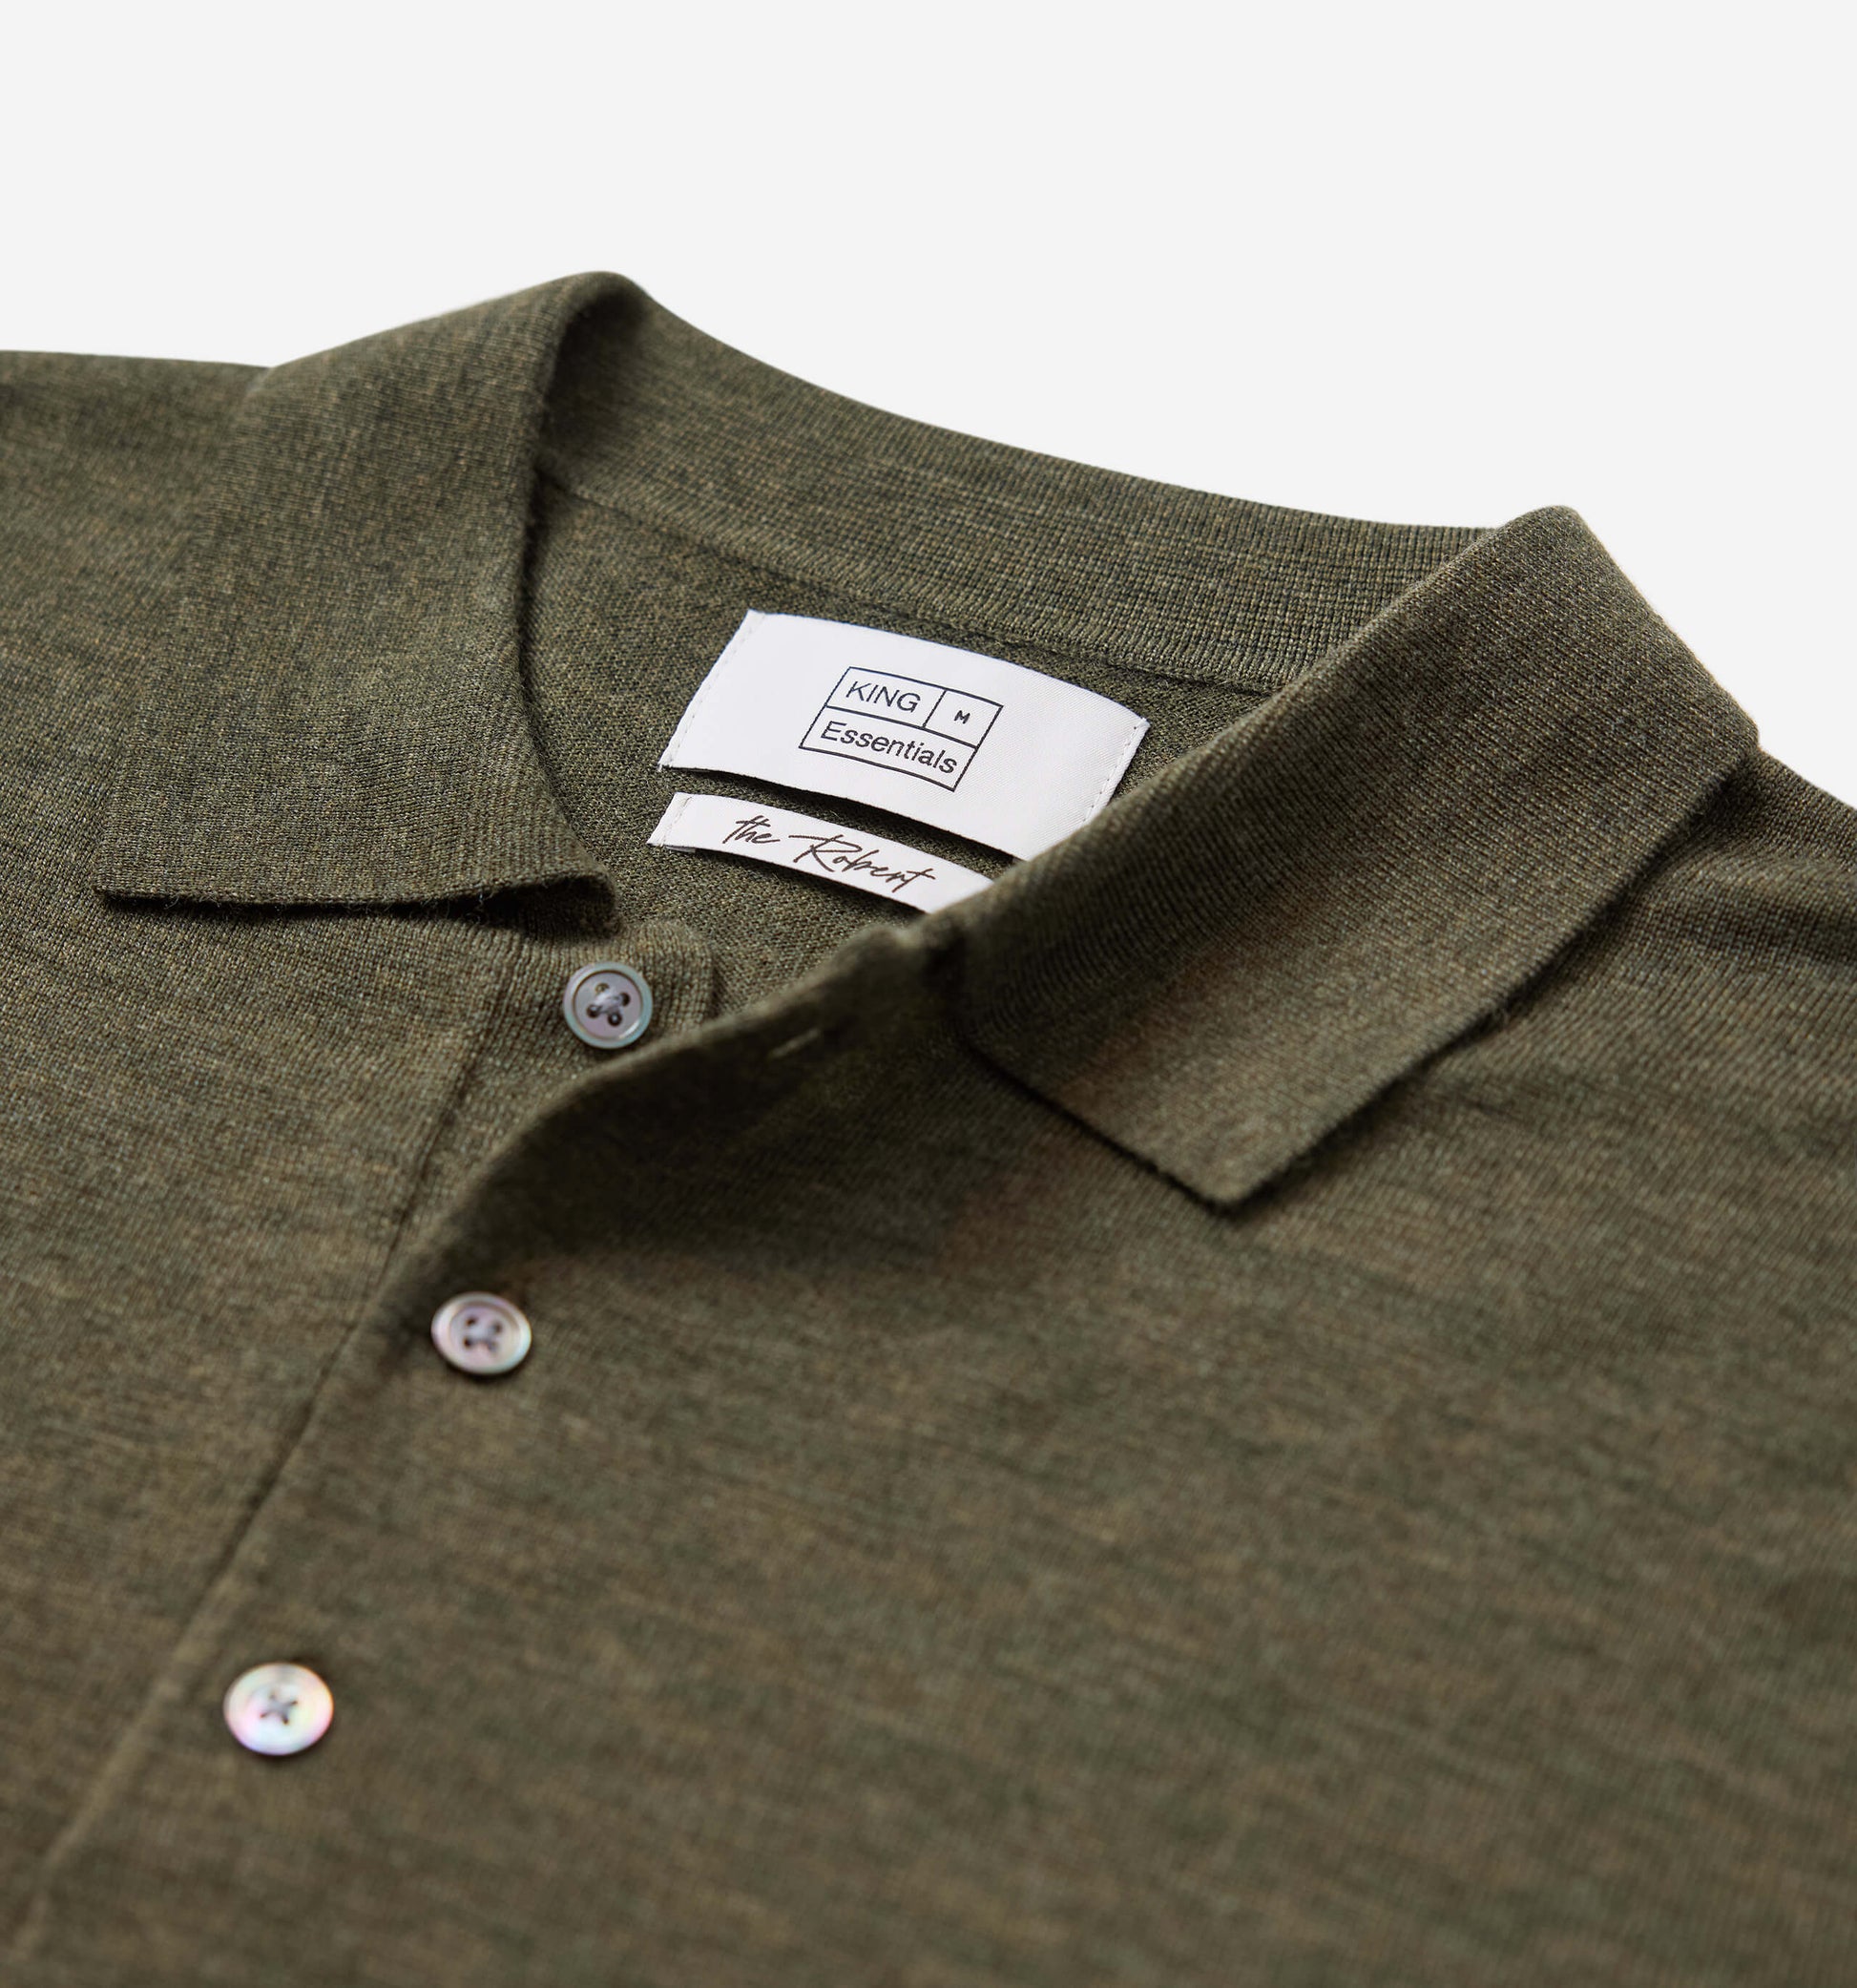 The Robert - Merino Wool Polo In Army From King Essentials